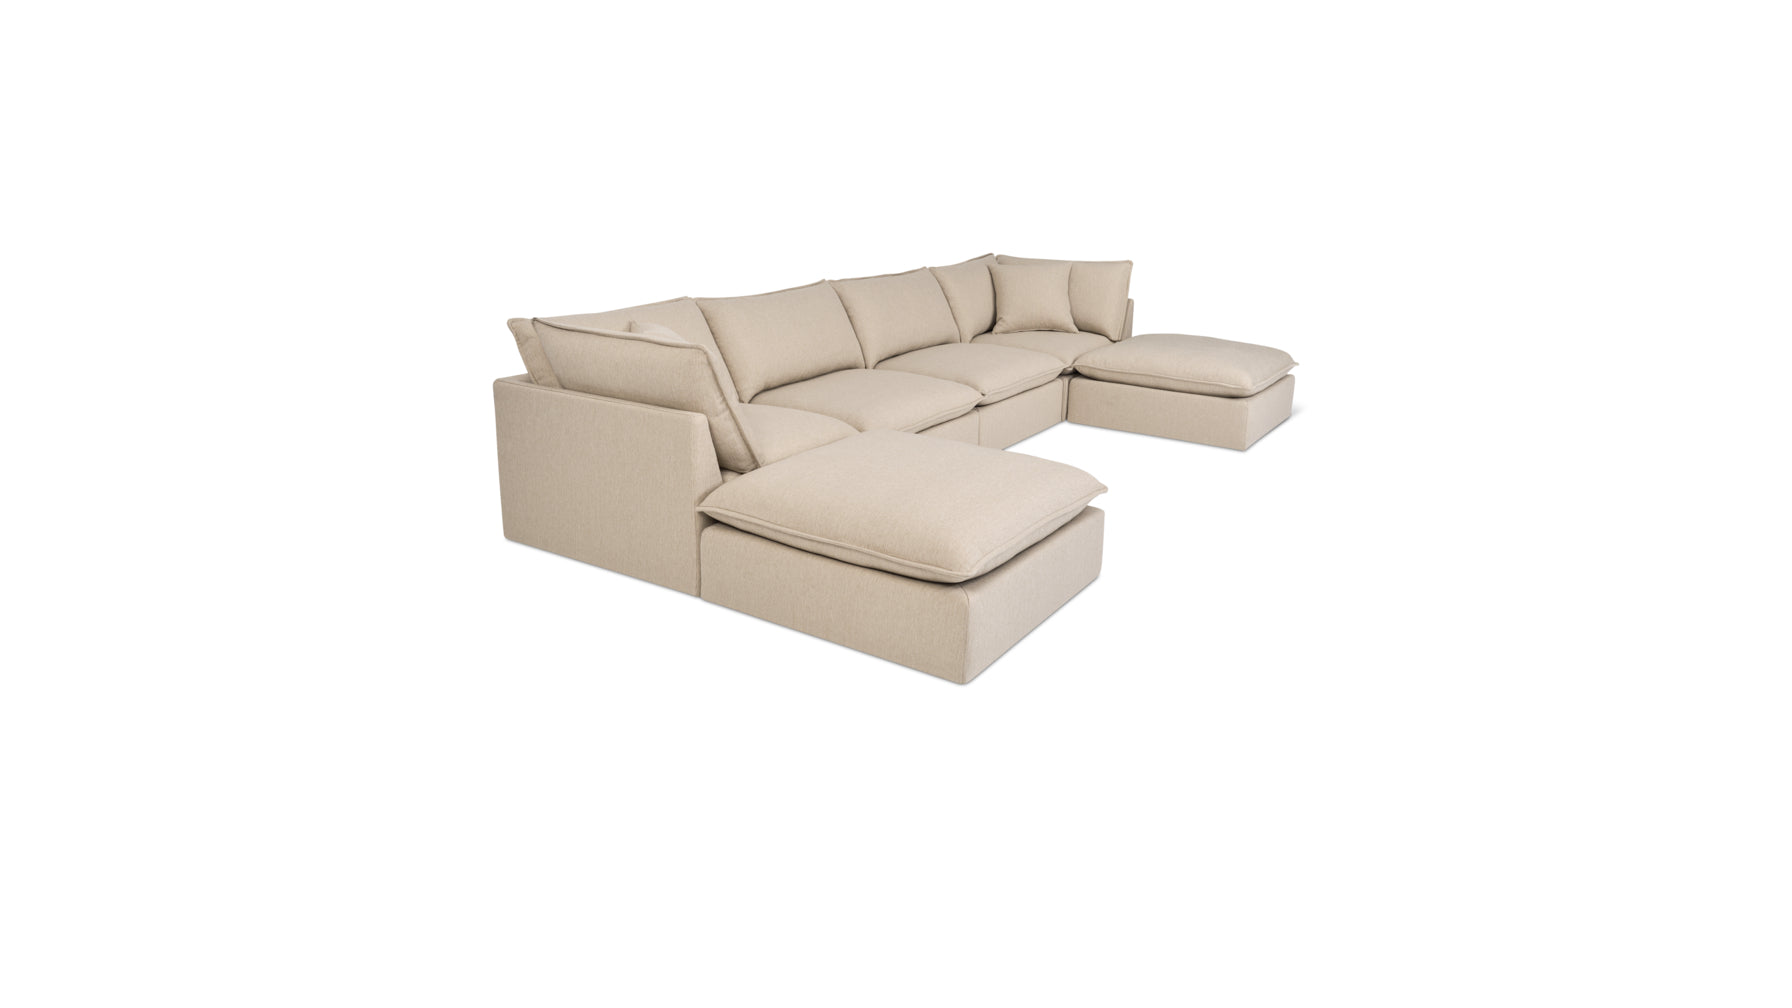 Chill Time 6-Piece Modular U-Shaped Sectional, Biscuit - Image 3